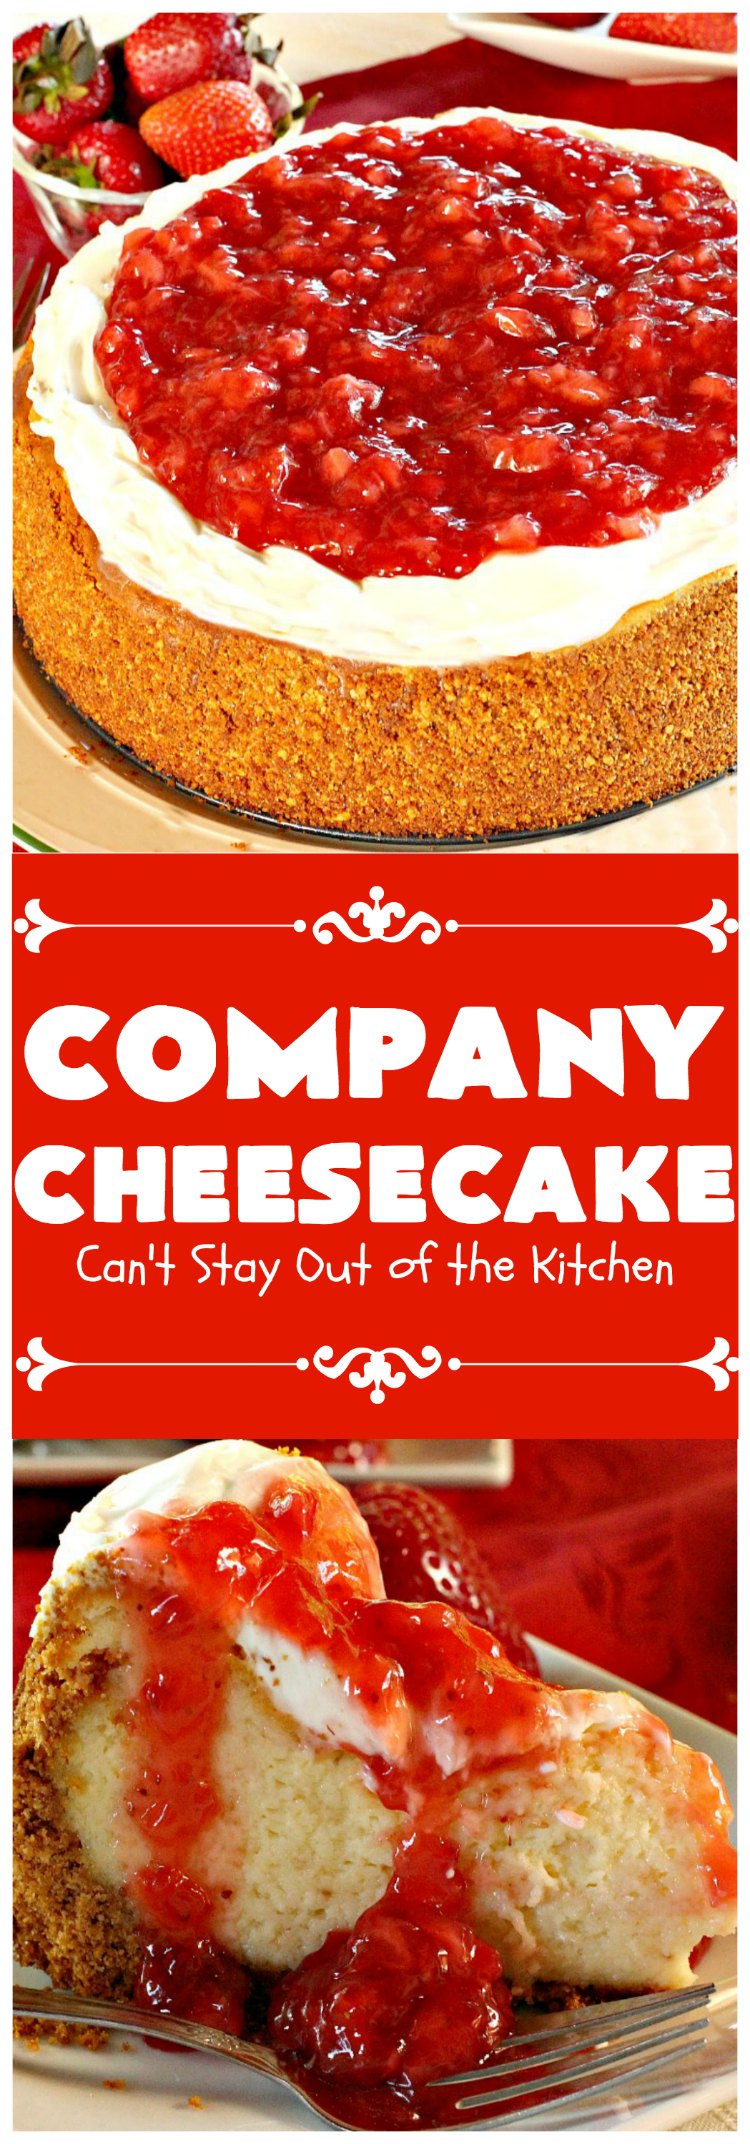 Company Cheesecake | Can't Stay Out of the Kitchen